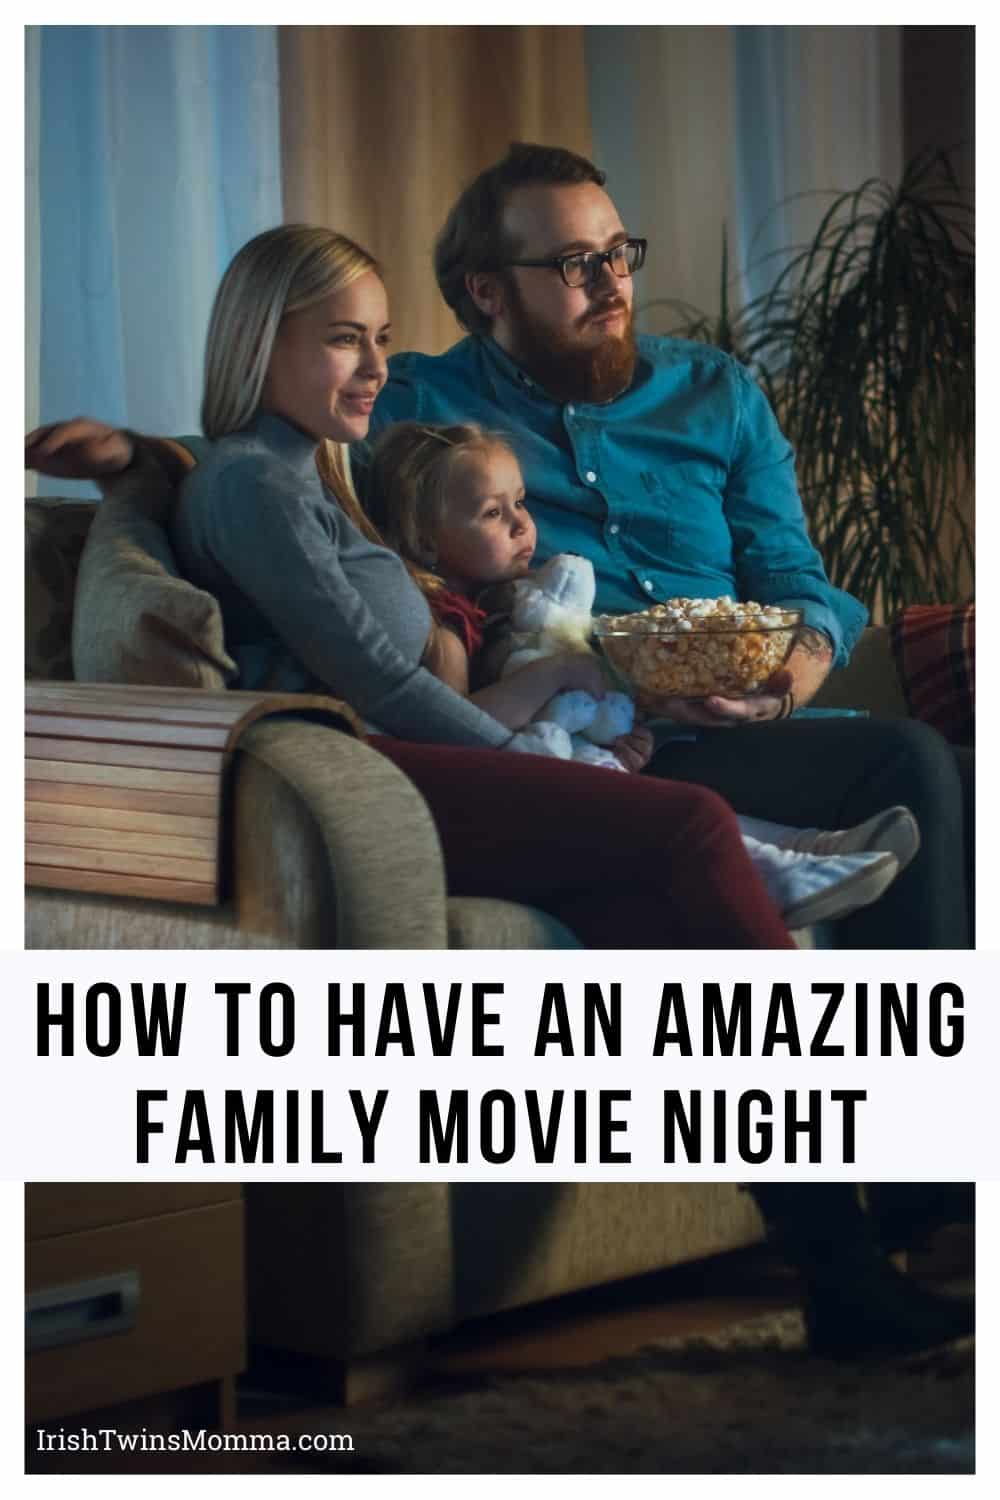 How To Have an Amazing Family Movie Night